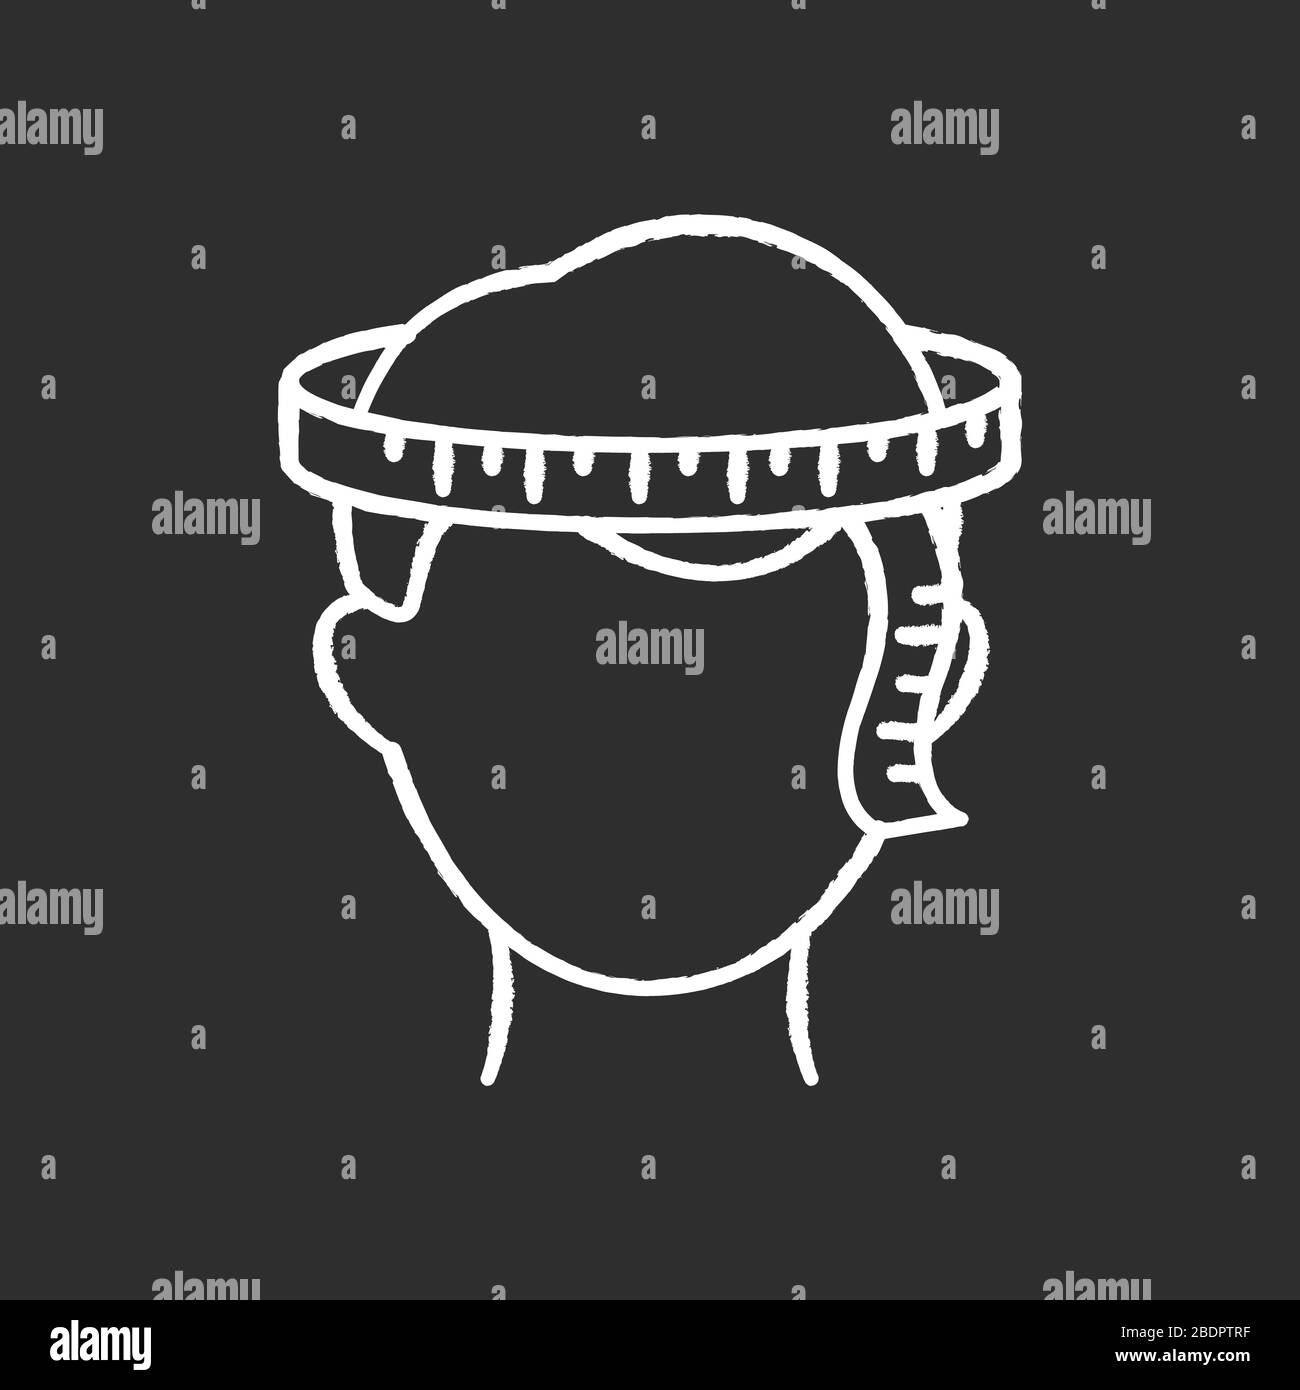 https://c8.alamy.com/comp/2BDPTRF/head-circumference-chalk-white-icon-on-black-background-human-body-measuring-parameter-dimensions-specification-for-bespoke-headwear-custom-made-2BDPTRF.jpg